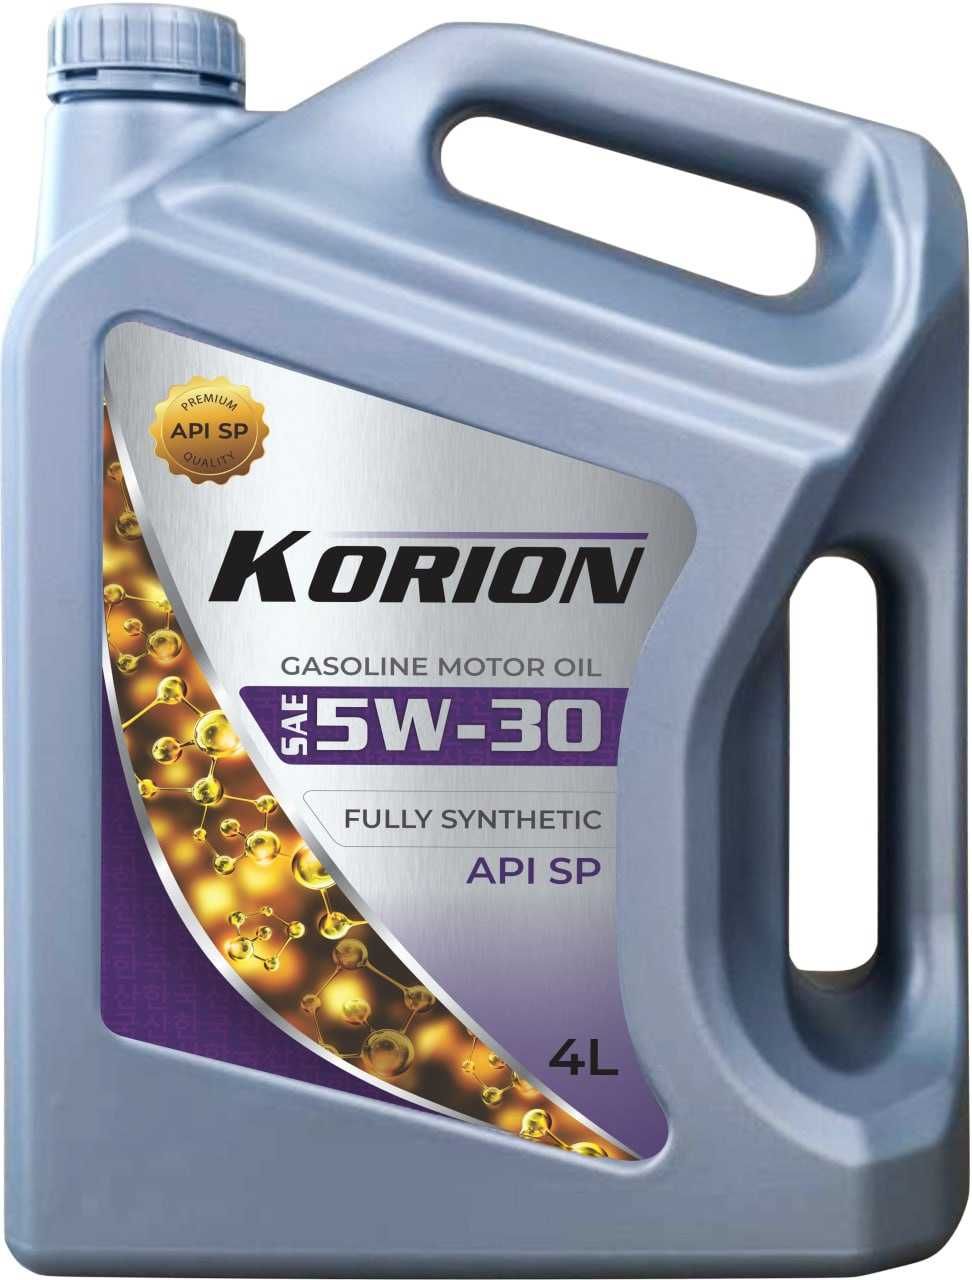 KORION 5W-30 Fully Synthetic SP